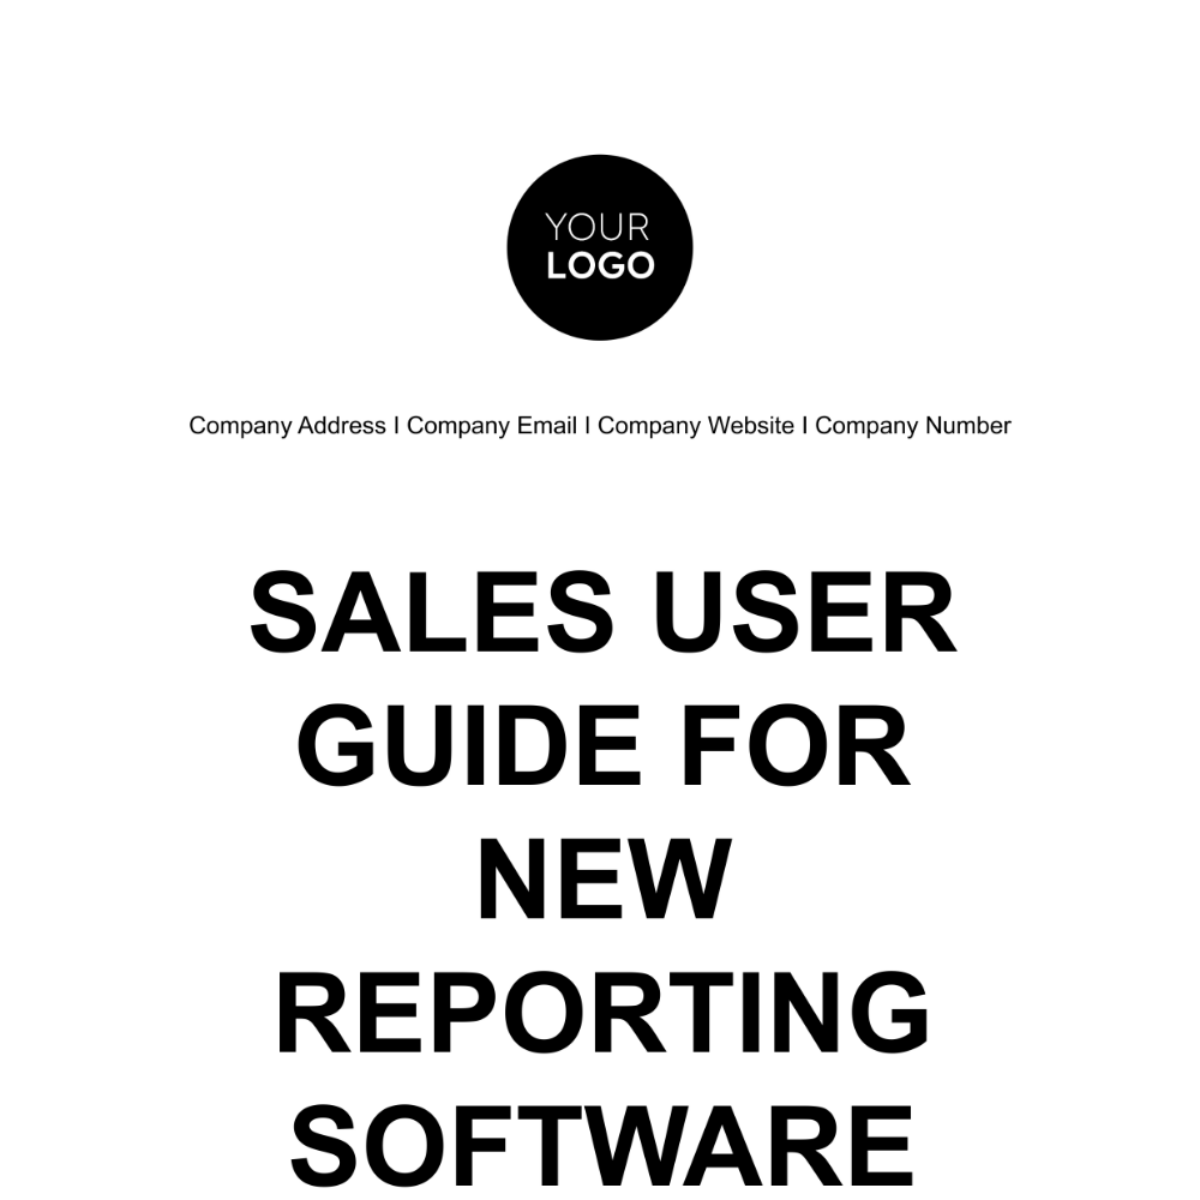 Sales User Guide for New Reporting Software Template